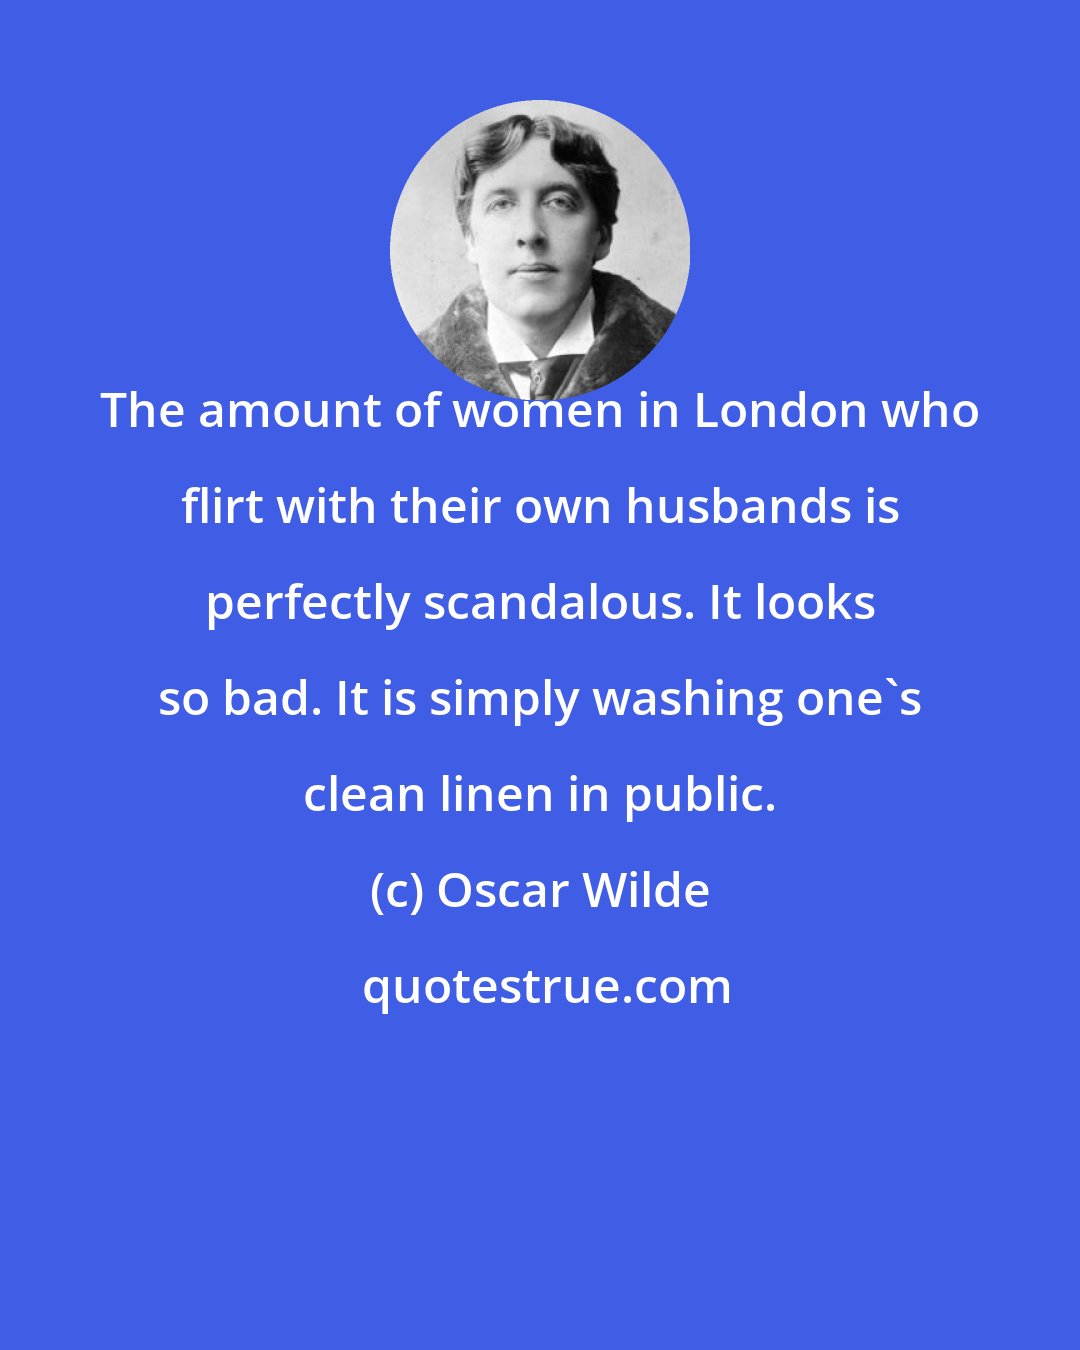 Oscar Wilde: The amount of women in London who flirt with their own husbands is perfectly scandalous. It looks so bad. It is simply washing one's clean linen in public.